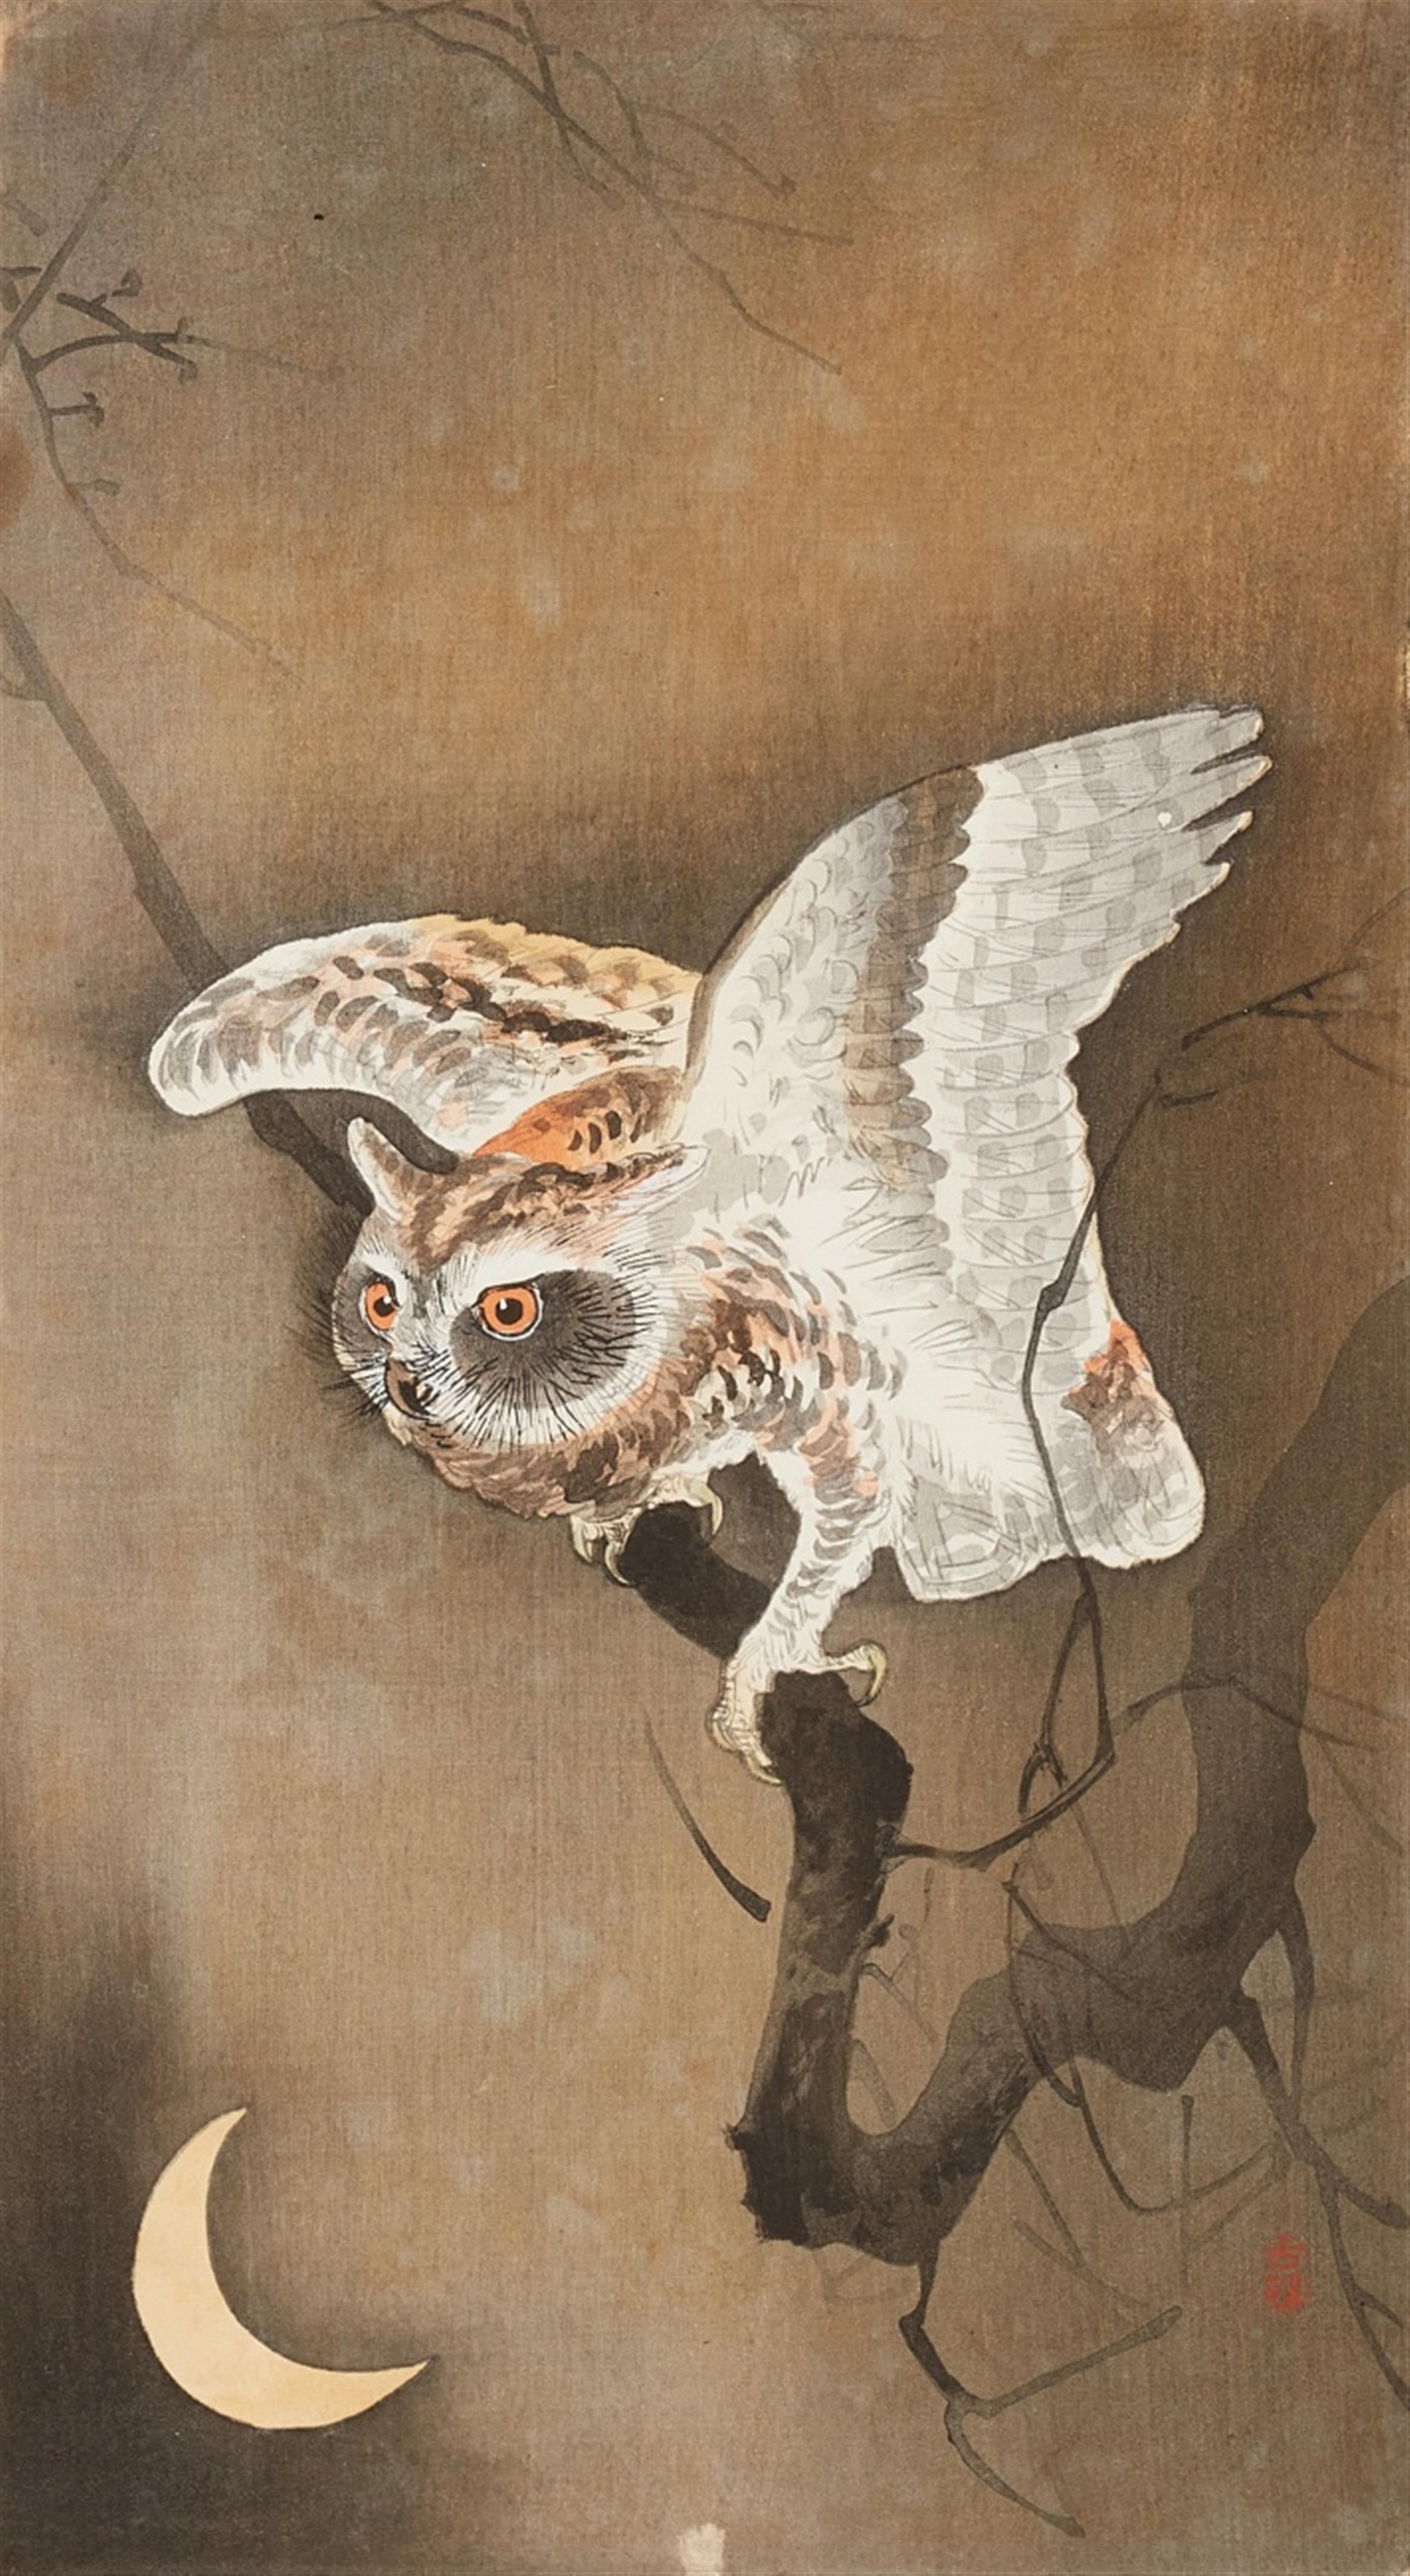 Ohara Shoson - Two ôtanzaku. Published by Daikokuya circa 1910-1920. a) Owl and moon sickle. Seal: Koson. Somewhat later edn. b) Monkey in persimmon tree. Signed: Koson. Seal: Koson. (2)

Go... - image-1